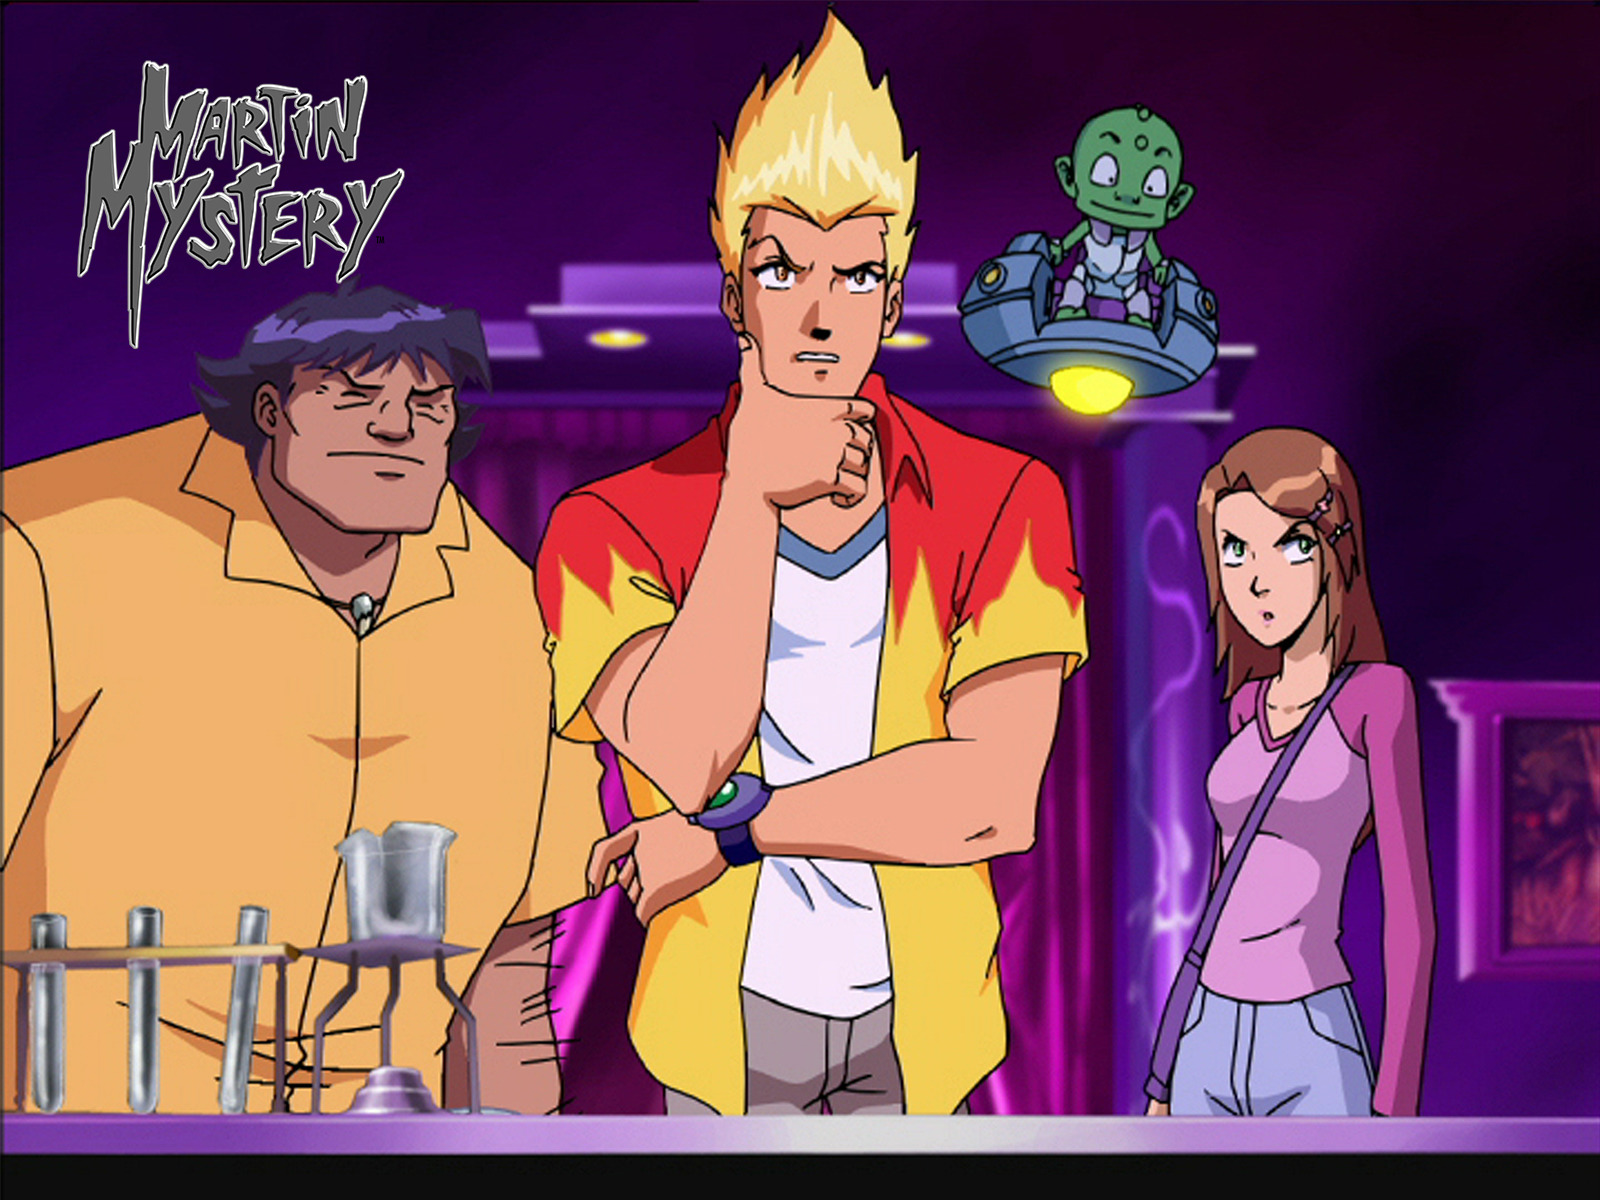 A screenshot from the show Martin Mystery of the Characters Martin, Diana, Java, and Billy